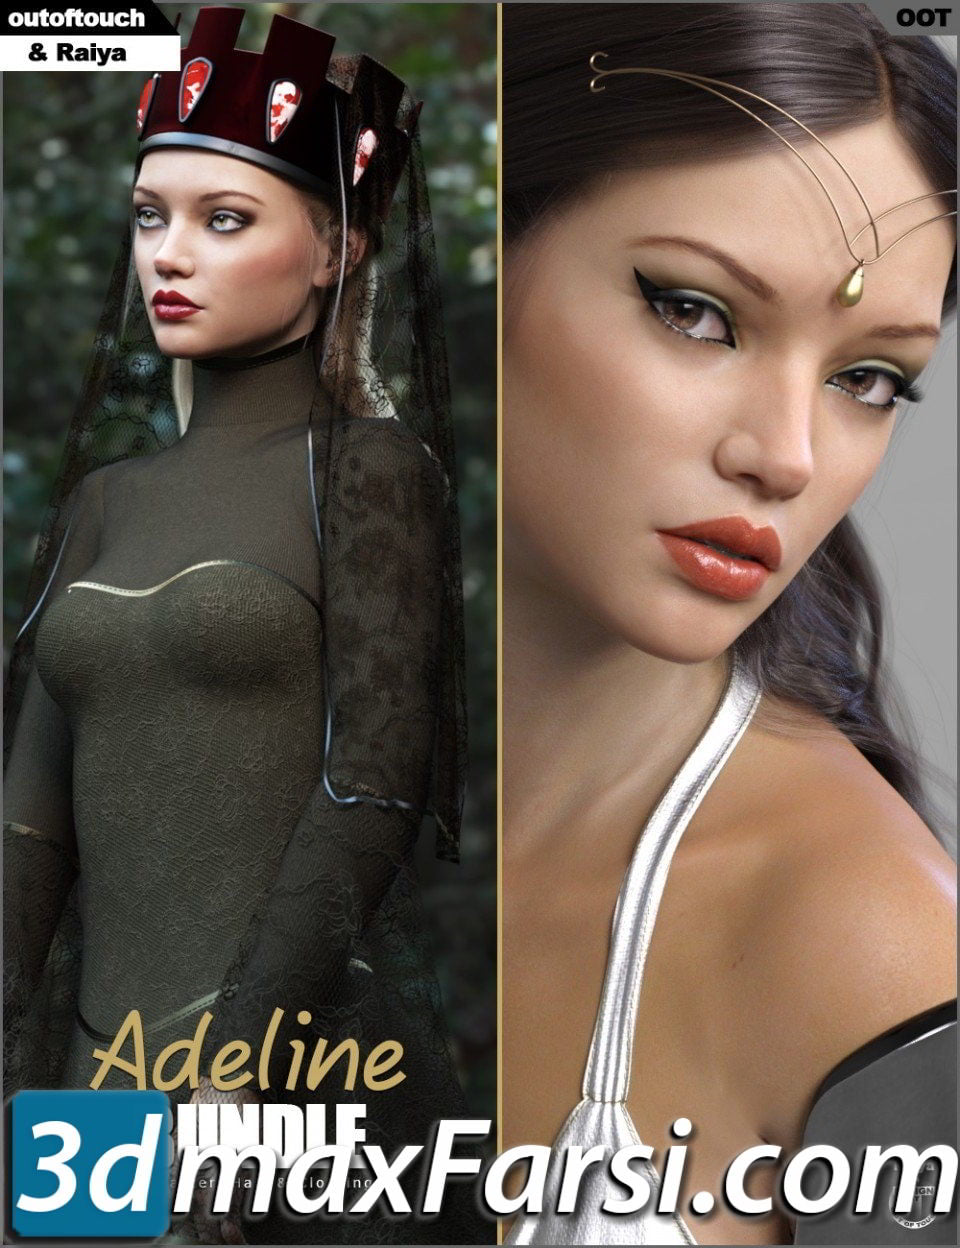 Daz3d, High Fantasy Adeline Clothing, Character and Hair Bundle free download